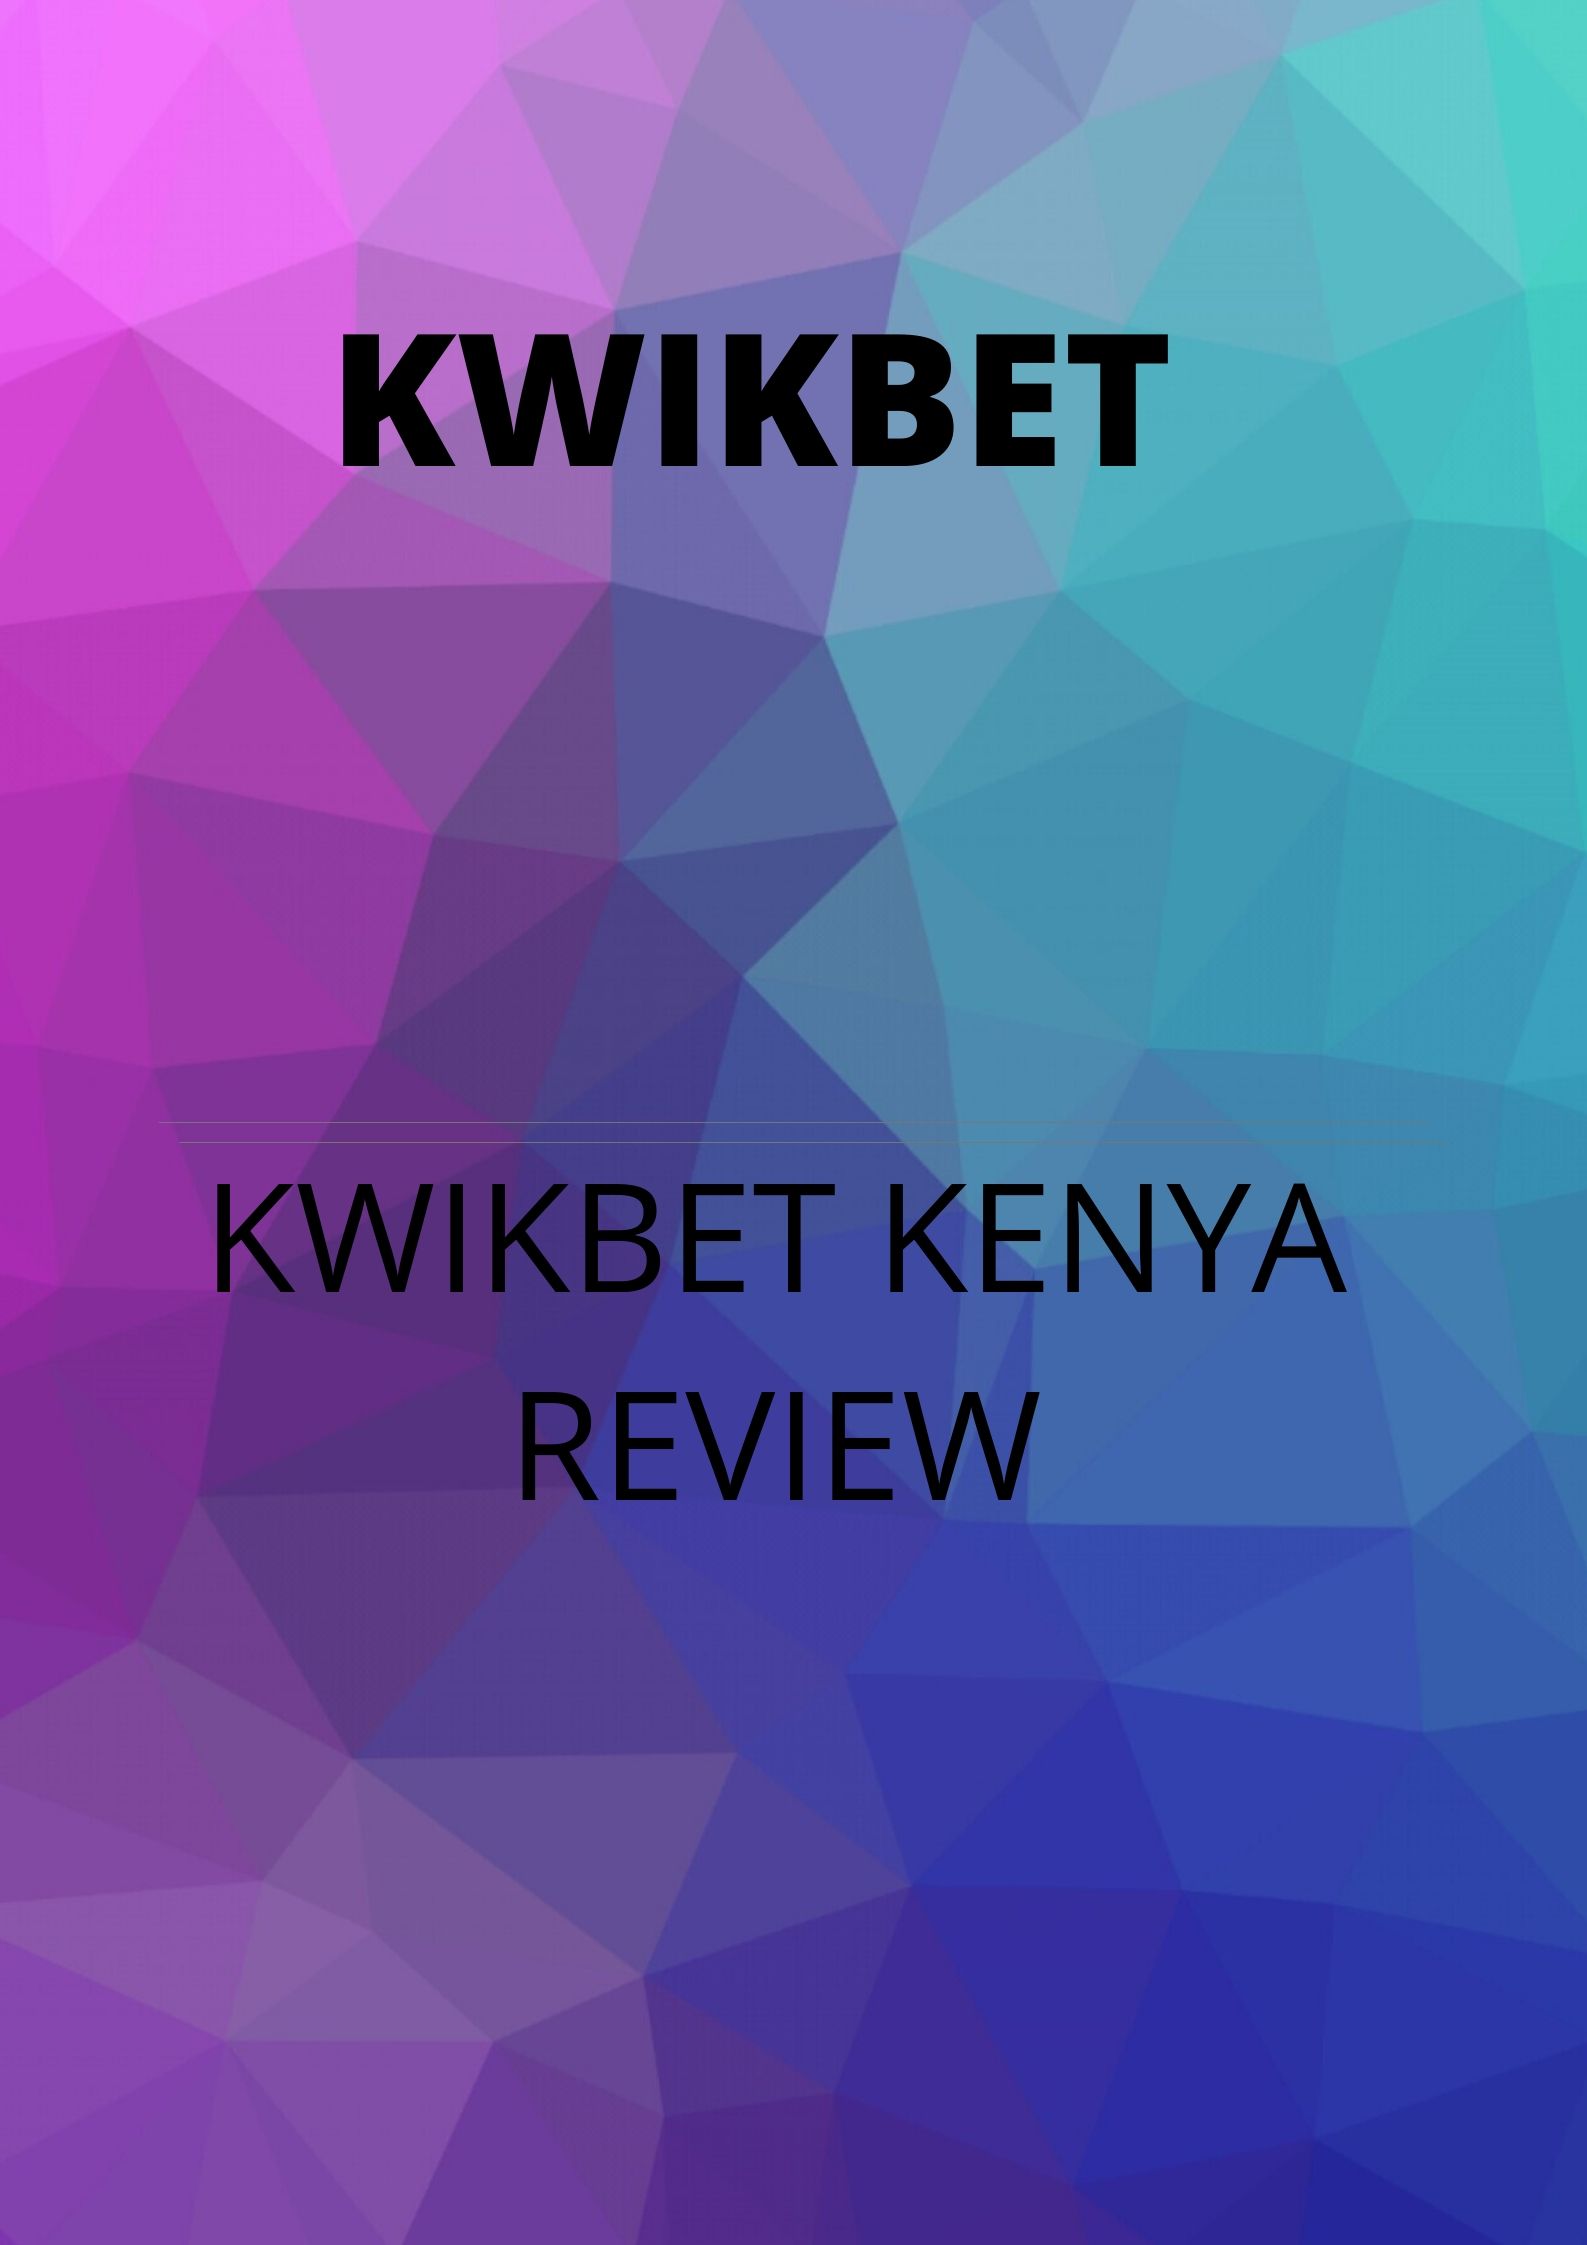 KwikBet Kenya: Log in and Register Details, Mobile App and you will Review 2022